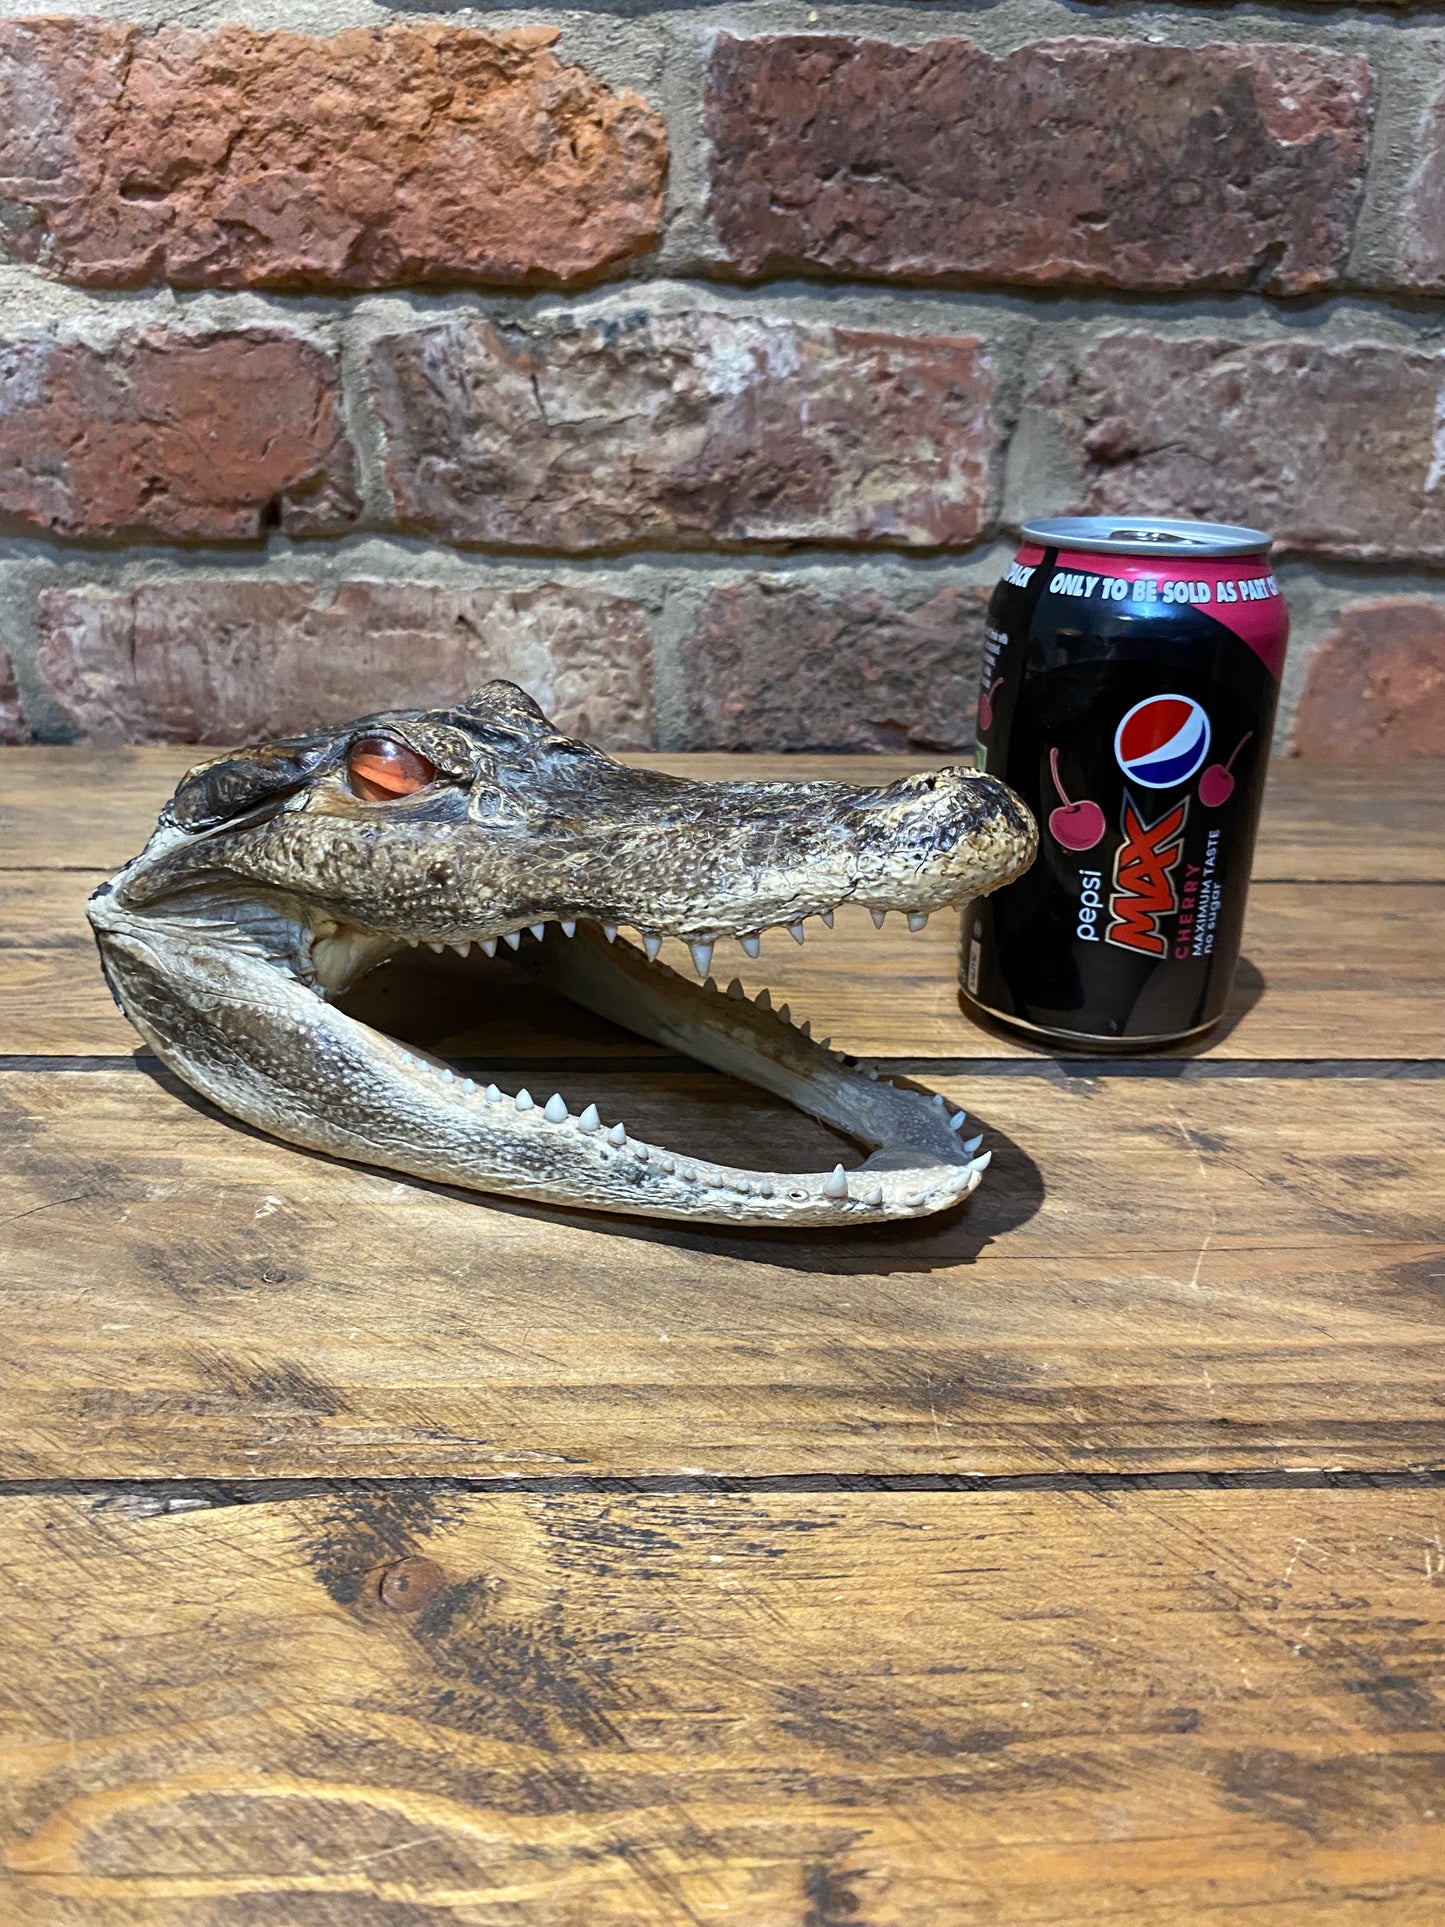 Authentic Crocodile Skull - Vintage Taxidermy Collectible view with a can of drink for scale